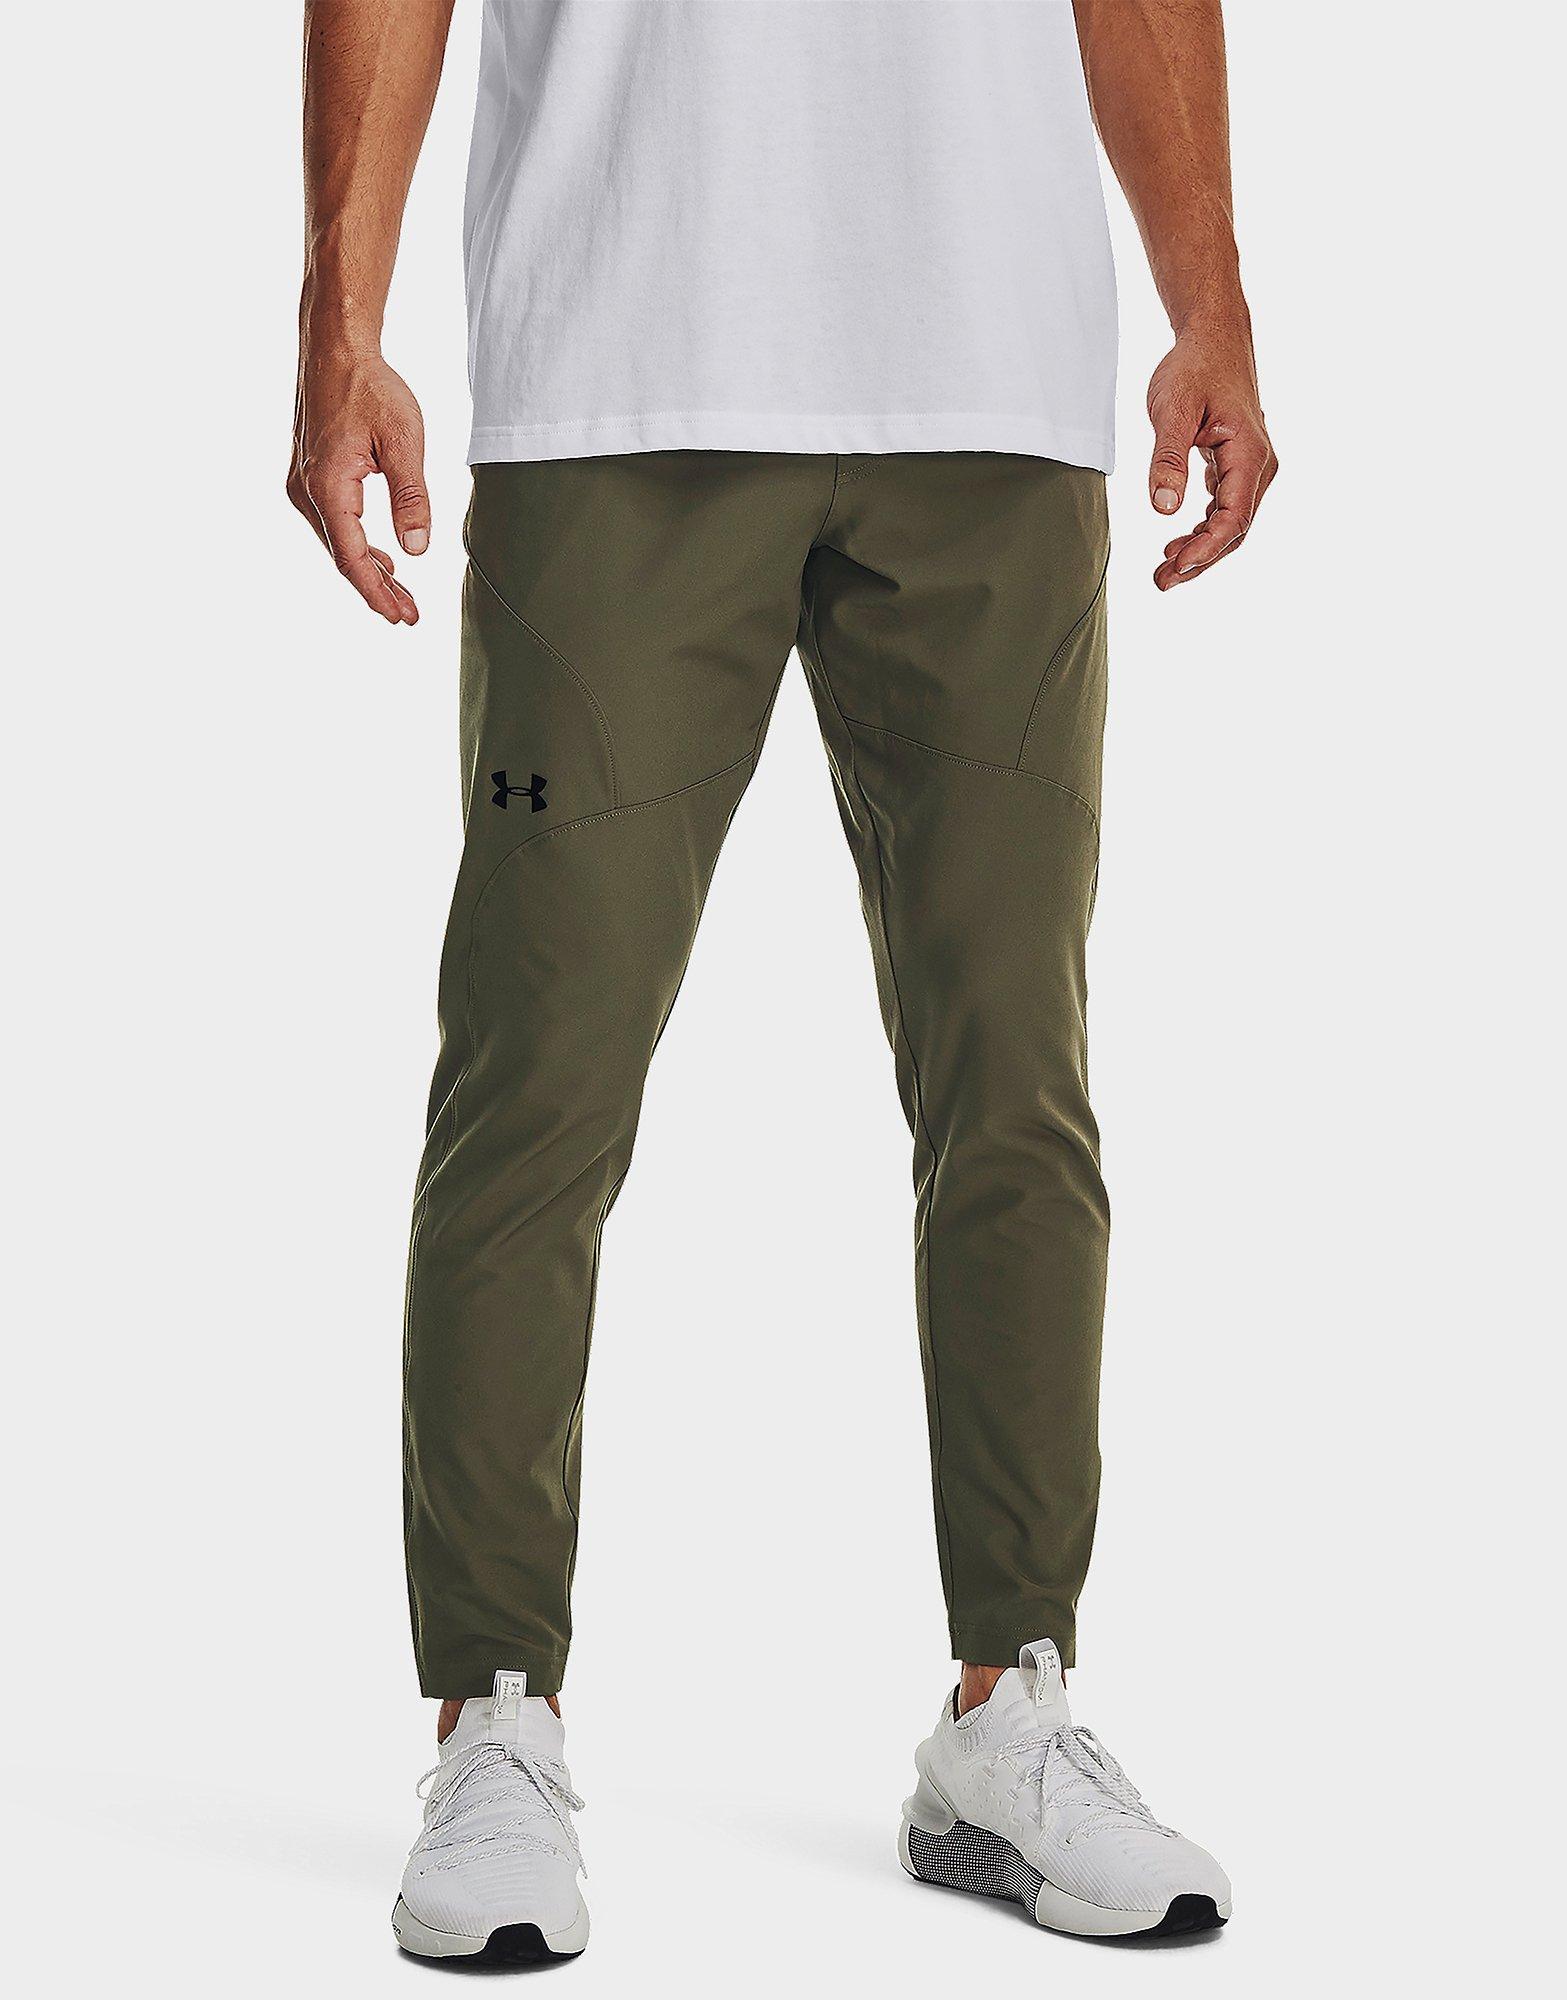 Under Armour Unstoppable Tapered Pants | JD Sports UK